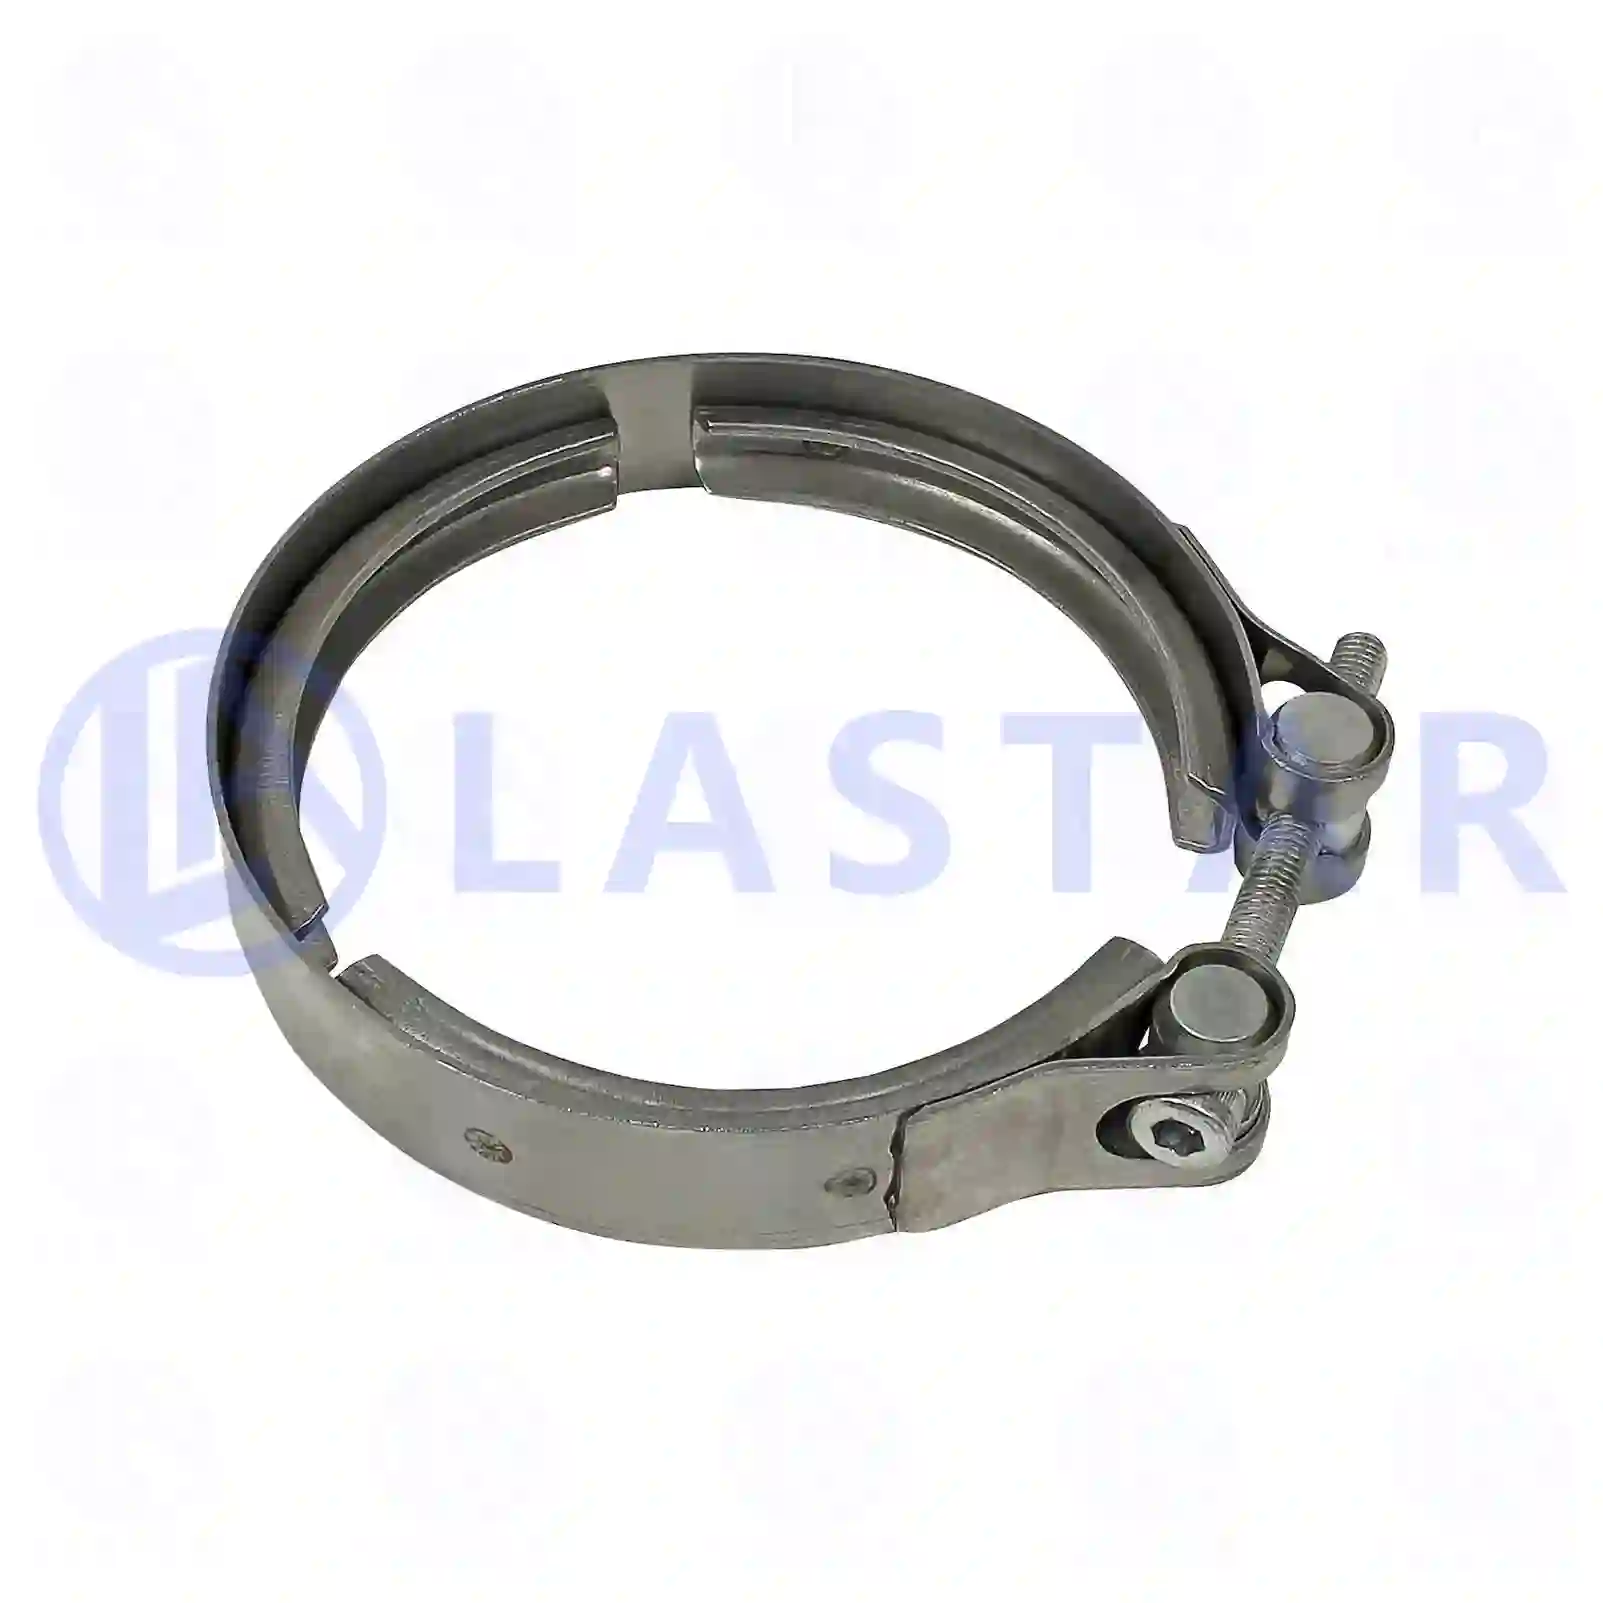 Clamp, 77704720, 1431701, ZG00325-0008 ||  77704720 Lastar Spare Part | Truck Spare Parts, Auotomotive Spare Parts Clamp, 77704720, 1431701, ZG00325-0008 ||  77704720 Lastar Spare Part | Truck Spare Parts, Auotomotive Spare Parts